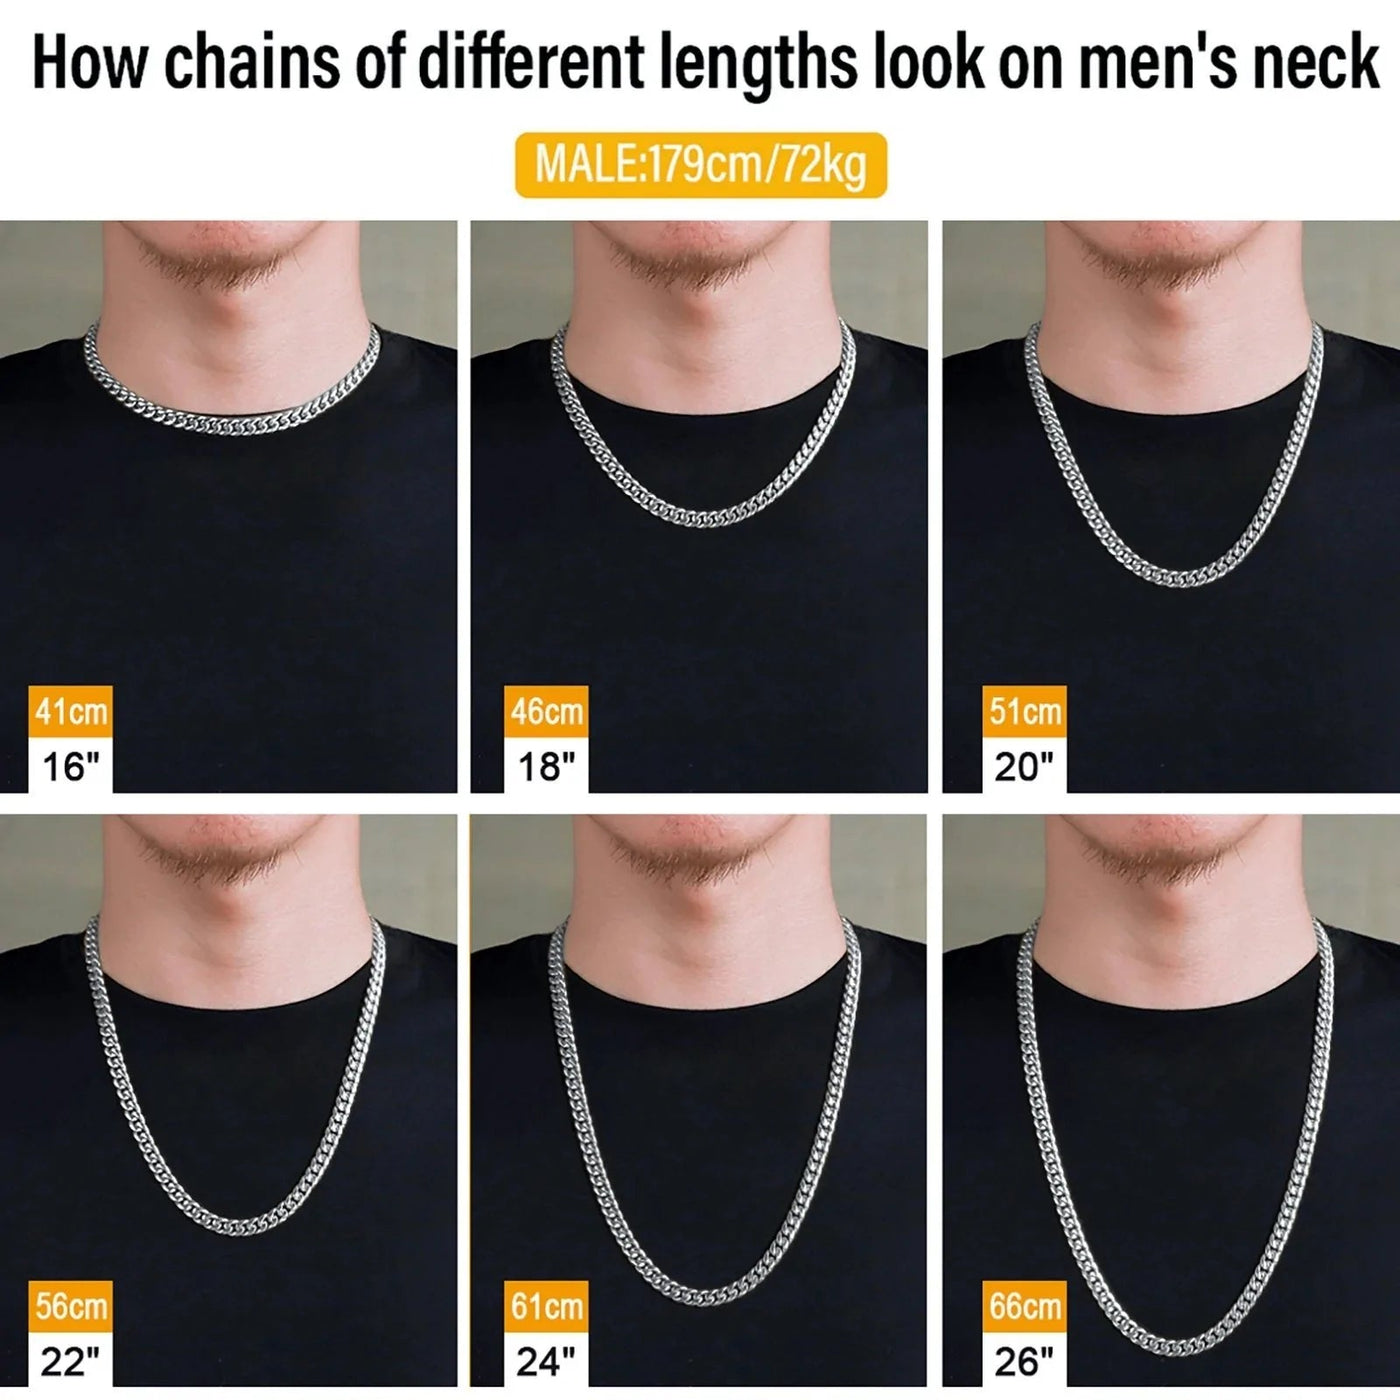 The Silver Lining Ⅱ® - Cuban Link Chain Silver White Gold (Push Button Clasp) Necklaces 